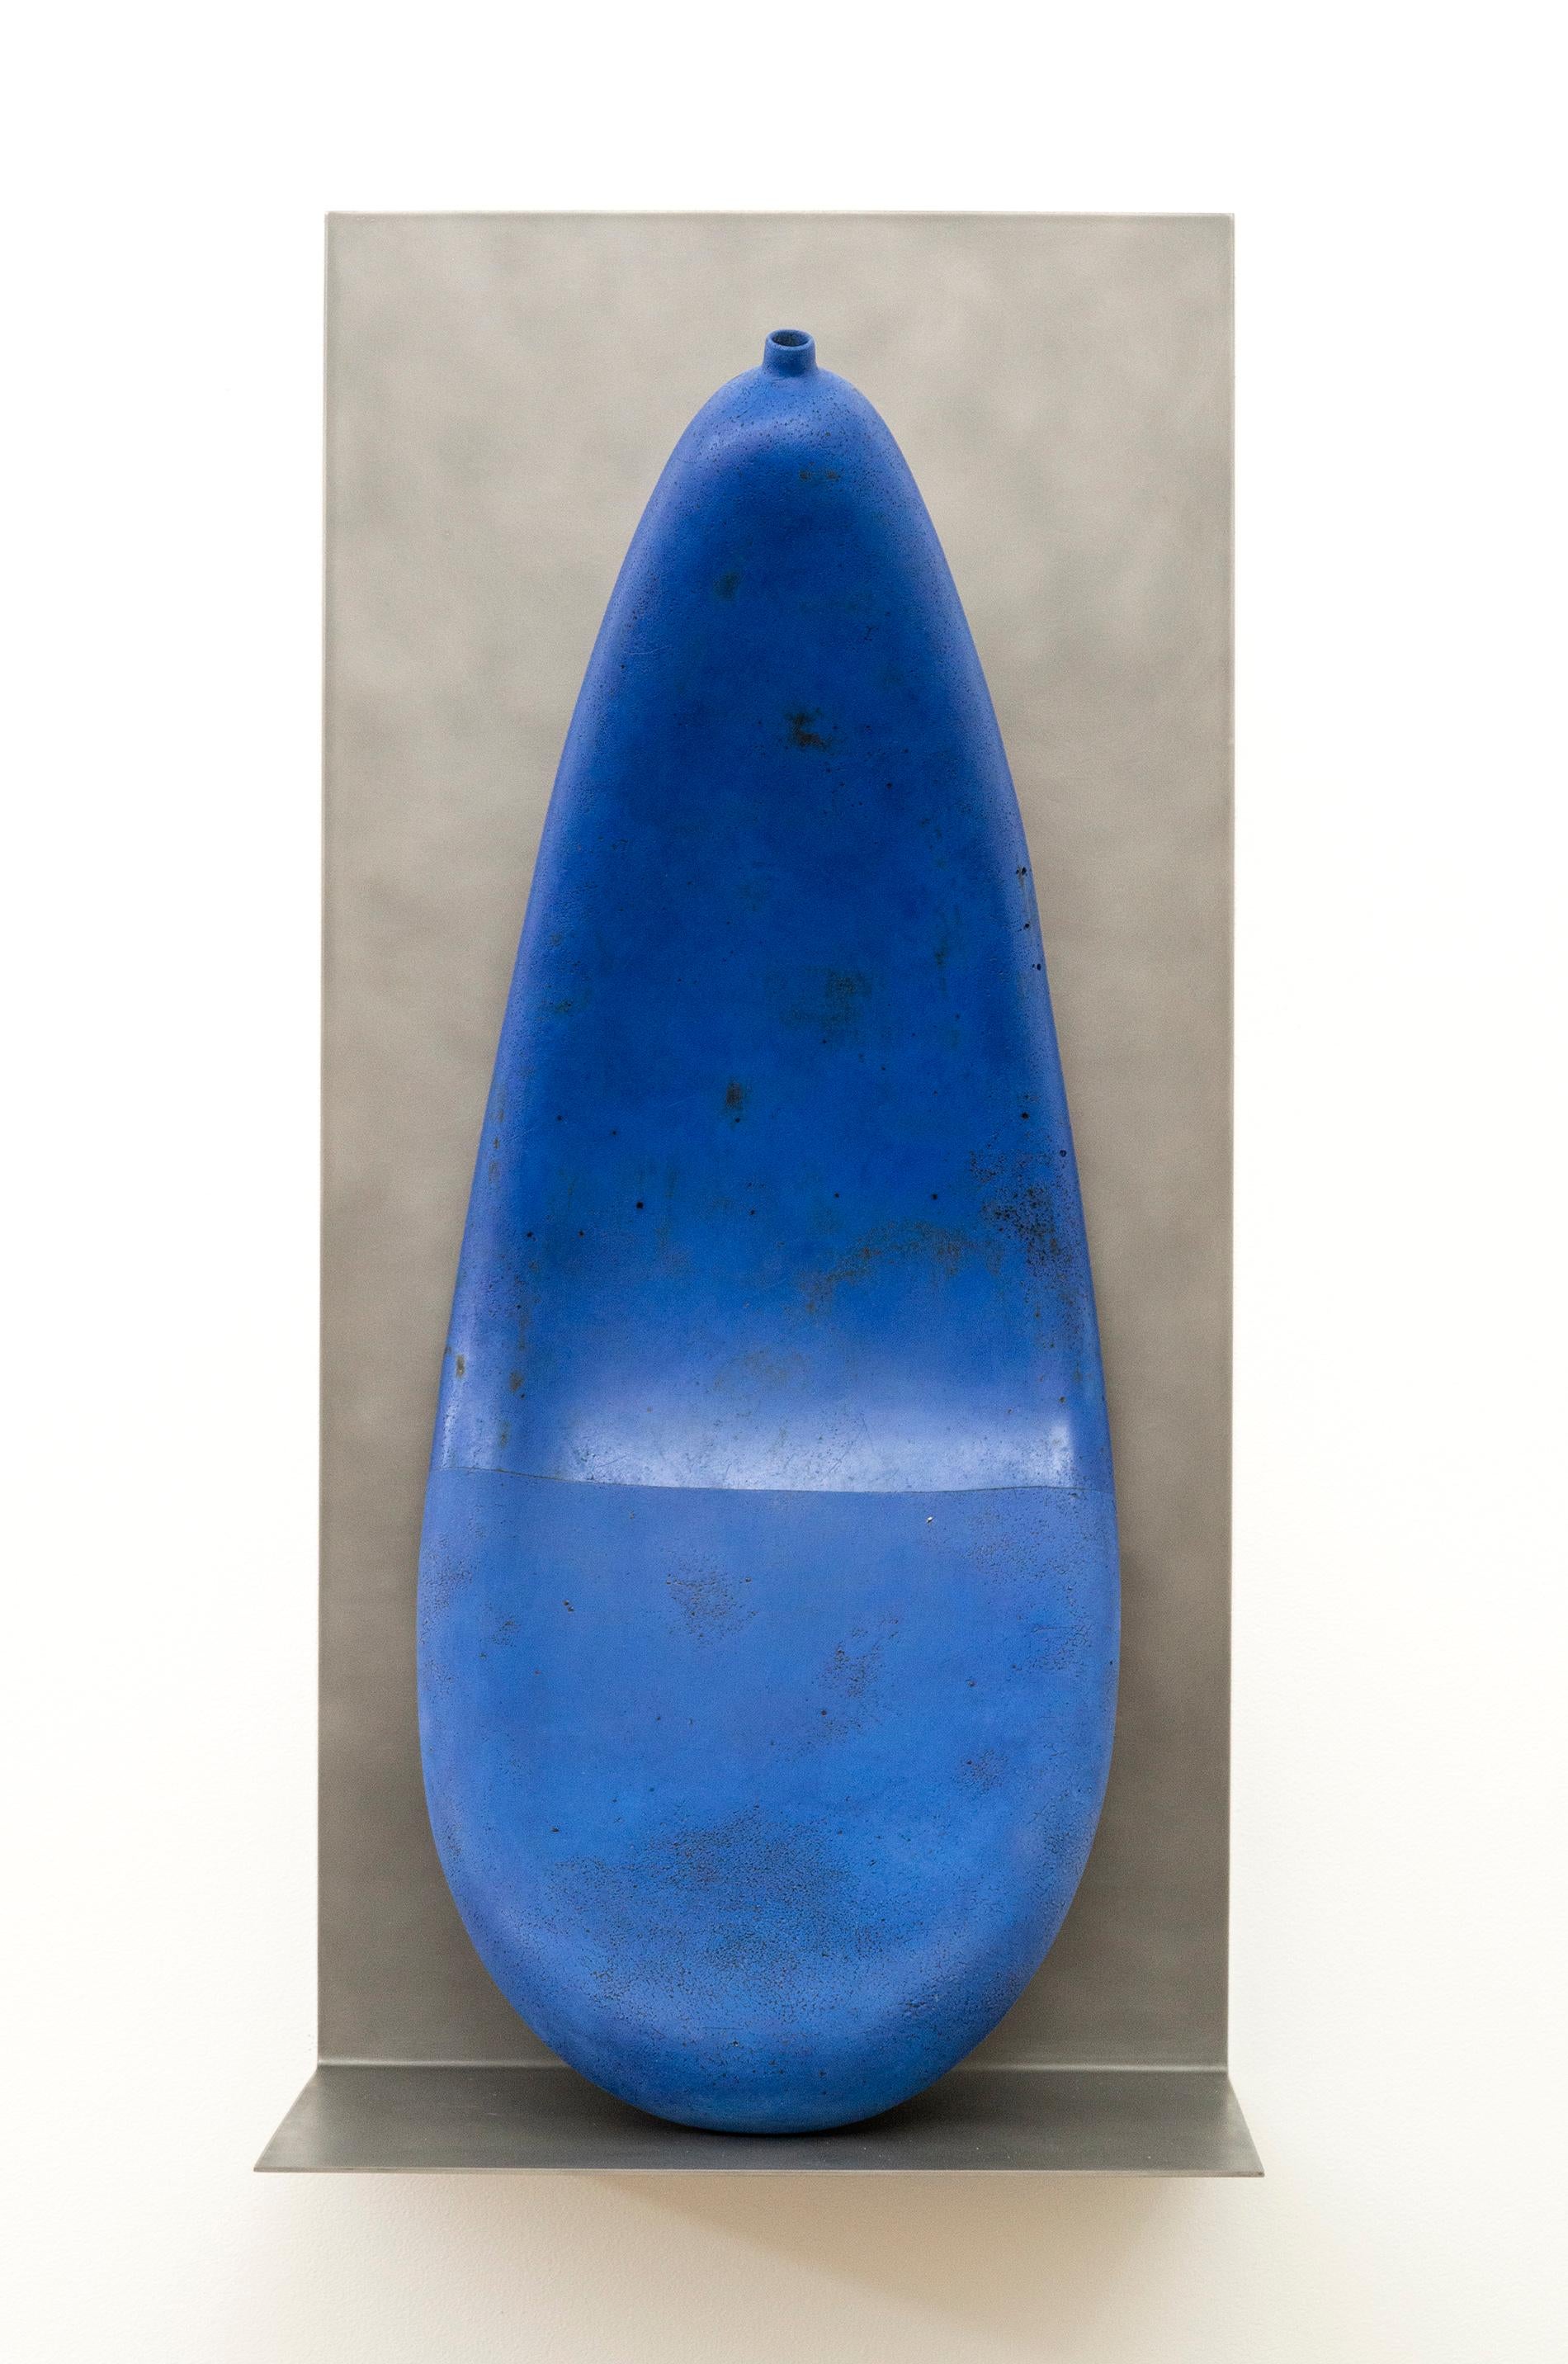 This intriguing large blue clay piece by Canadian artist Steven Heinemann bridges the divide between sculpture and ceramics. The teardrop-shaped vessel appears deflated and gently curved as if it is flowing down the steel shelf it sits on.